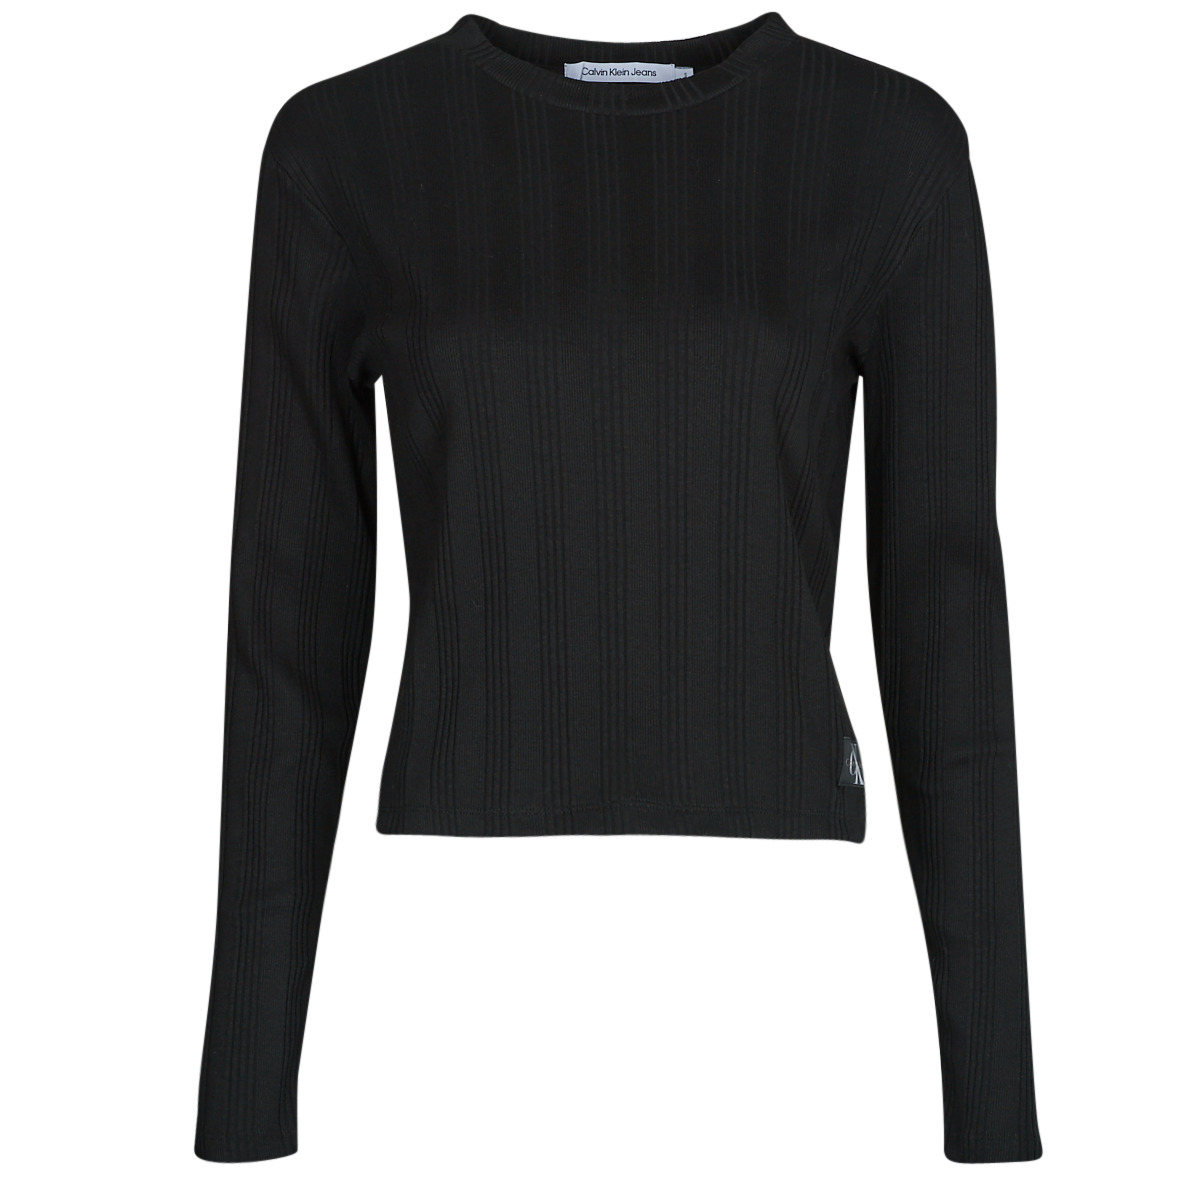 Calvin Klein Jeans BADGE RIB BABY TEE LONG SLEEVE Black - Free delivery |  Spartoo NET ! - Clothing Long sleeved shirts Women